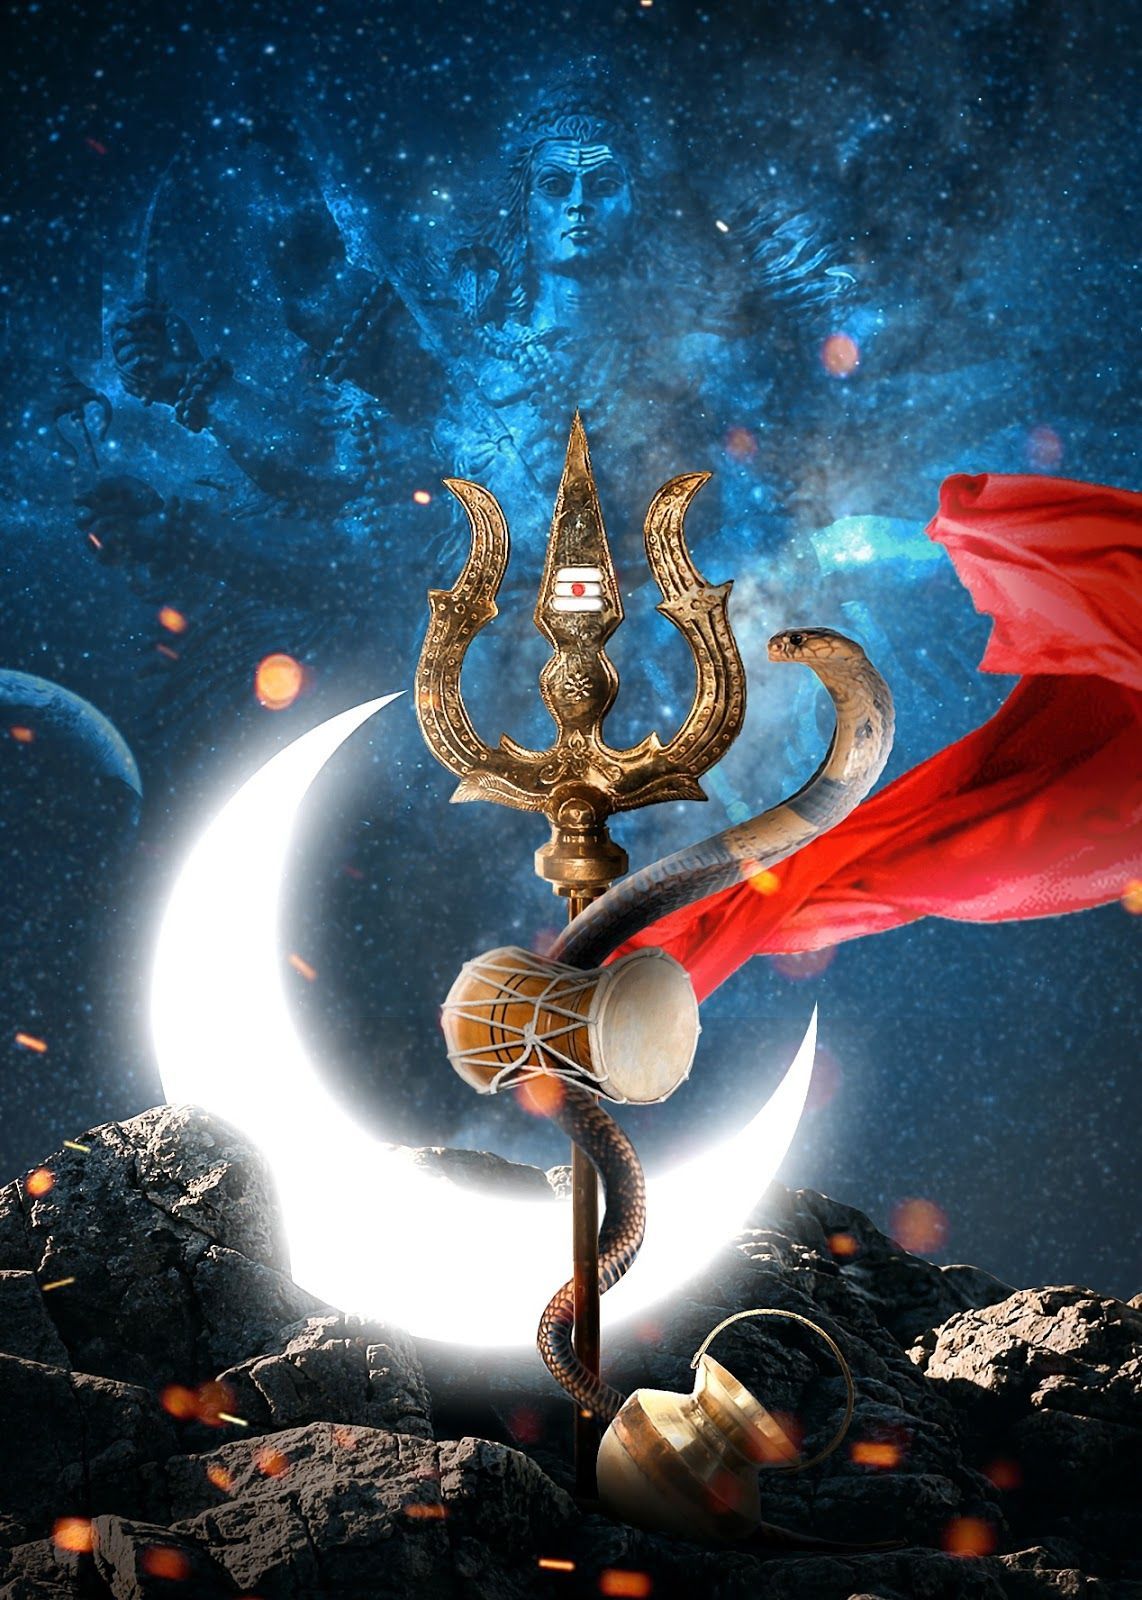 lord shiva images for wallpaper
